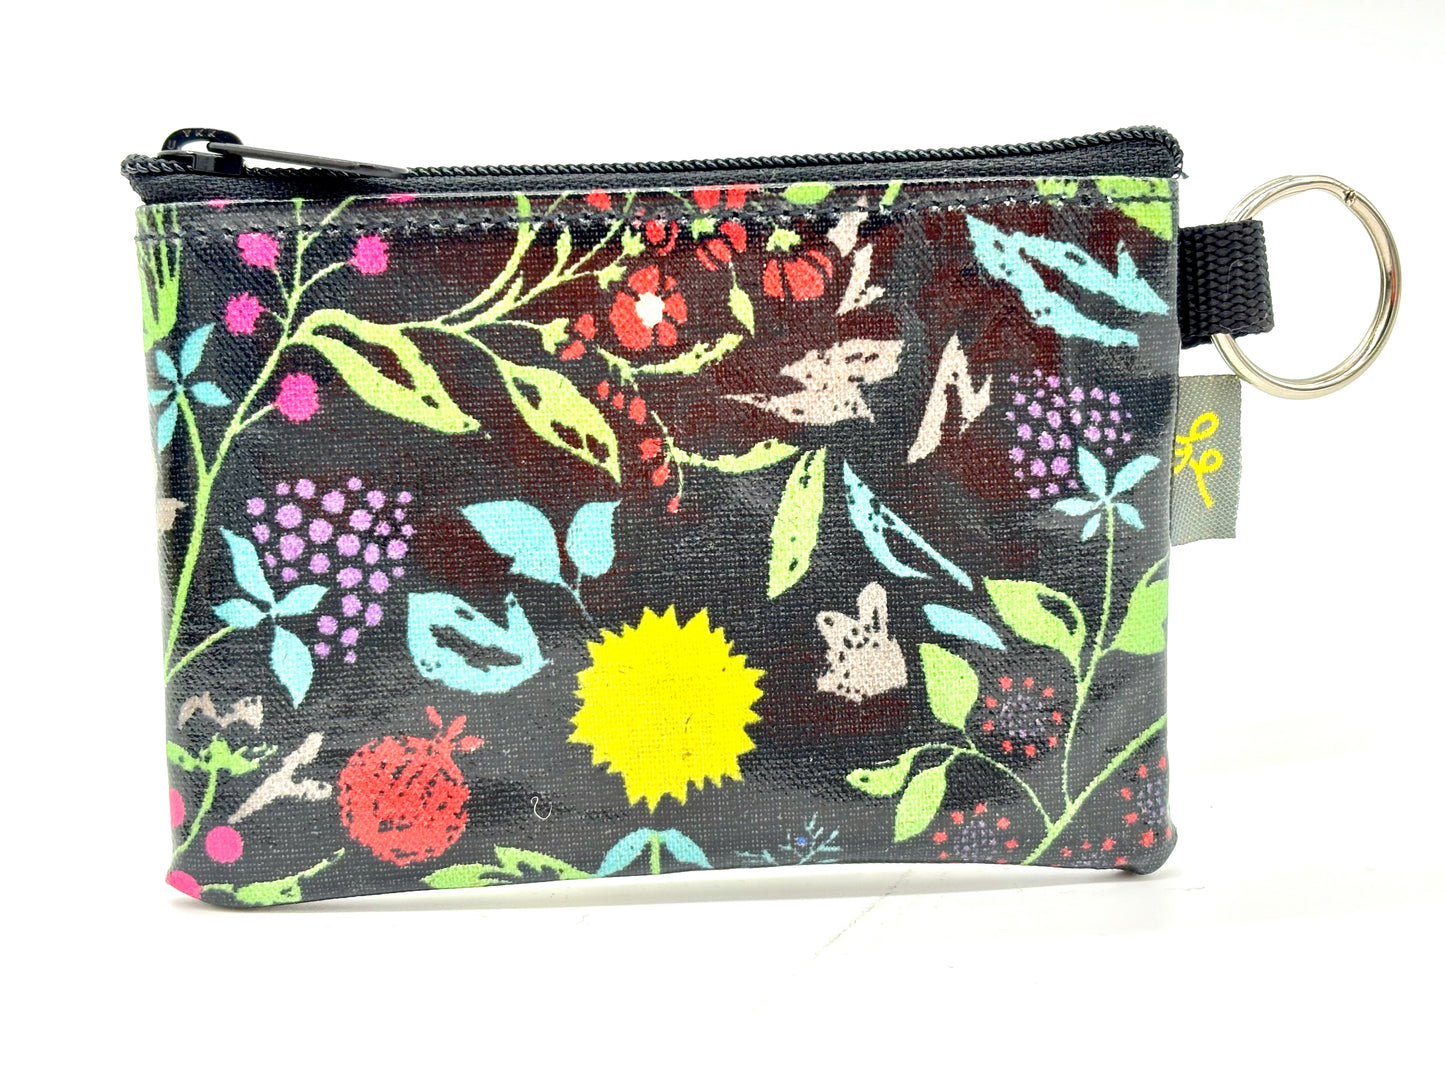 Coin Purse in Wildflowers pink and blue